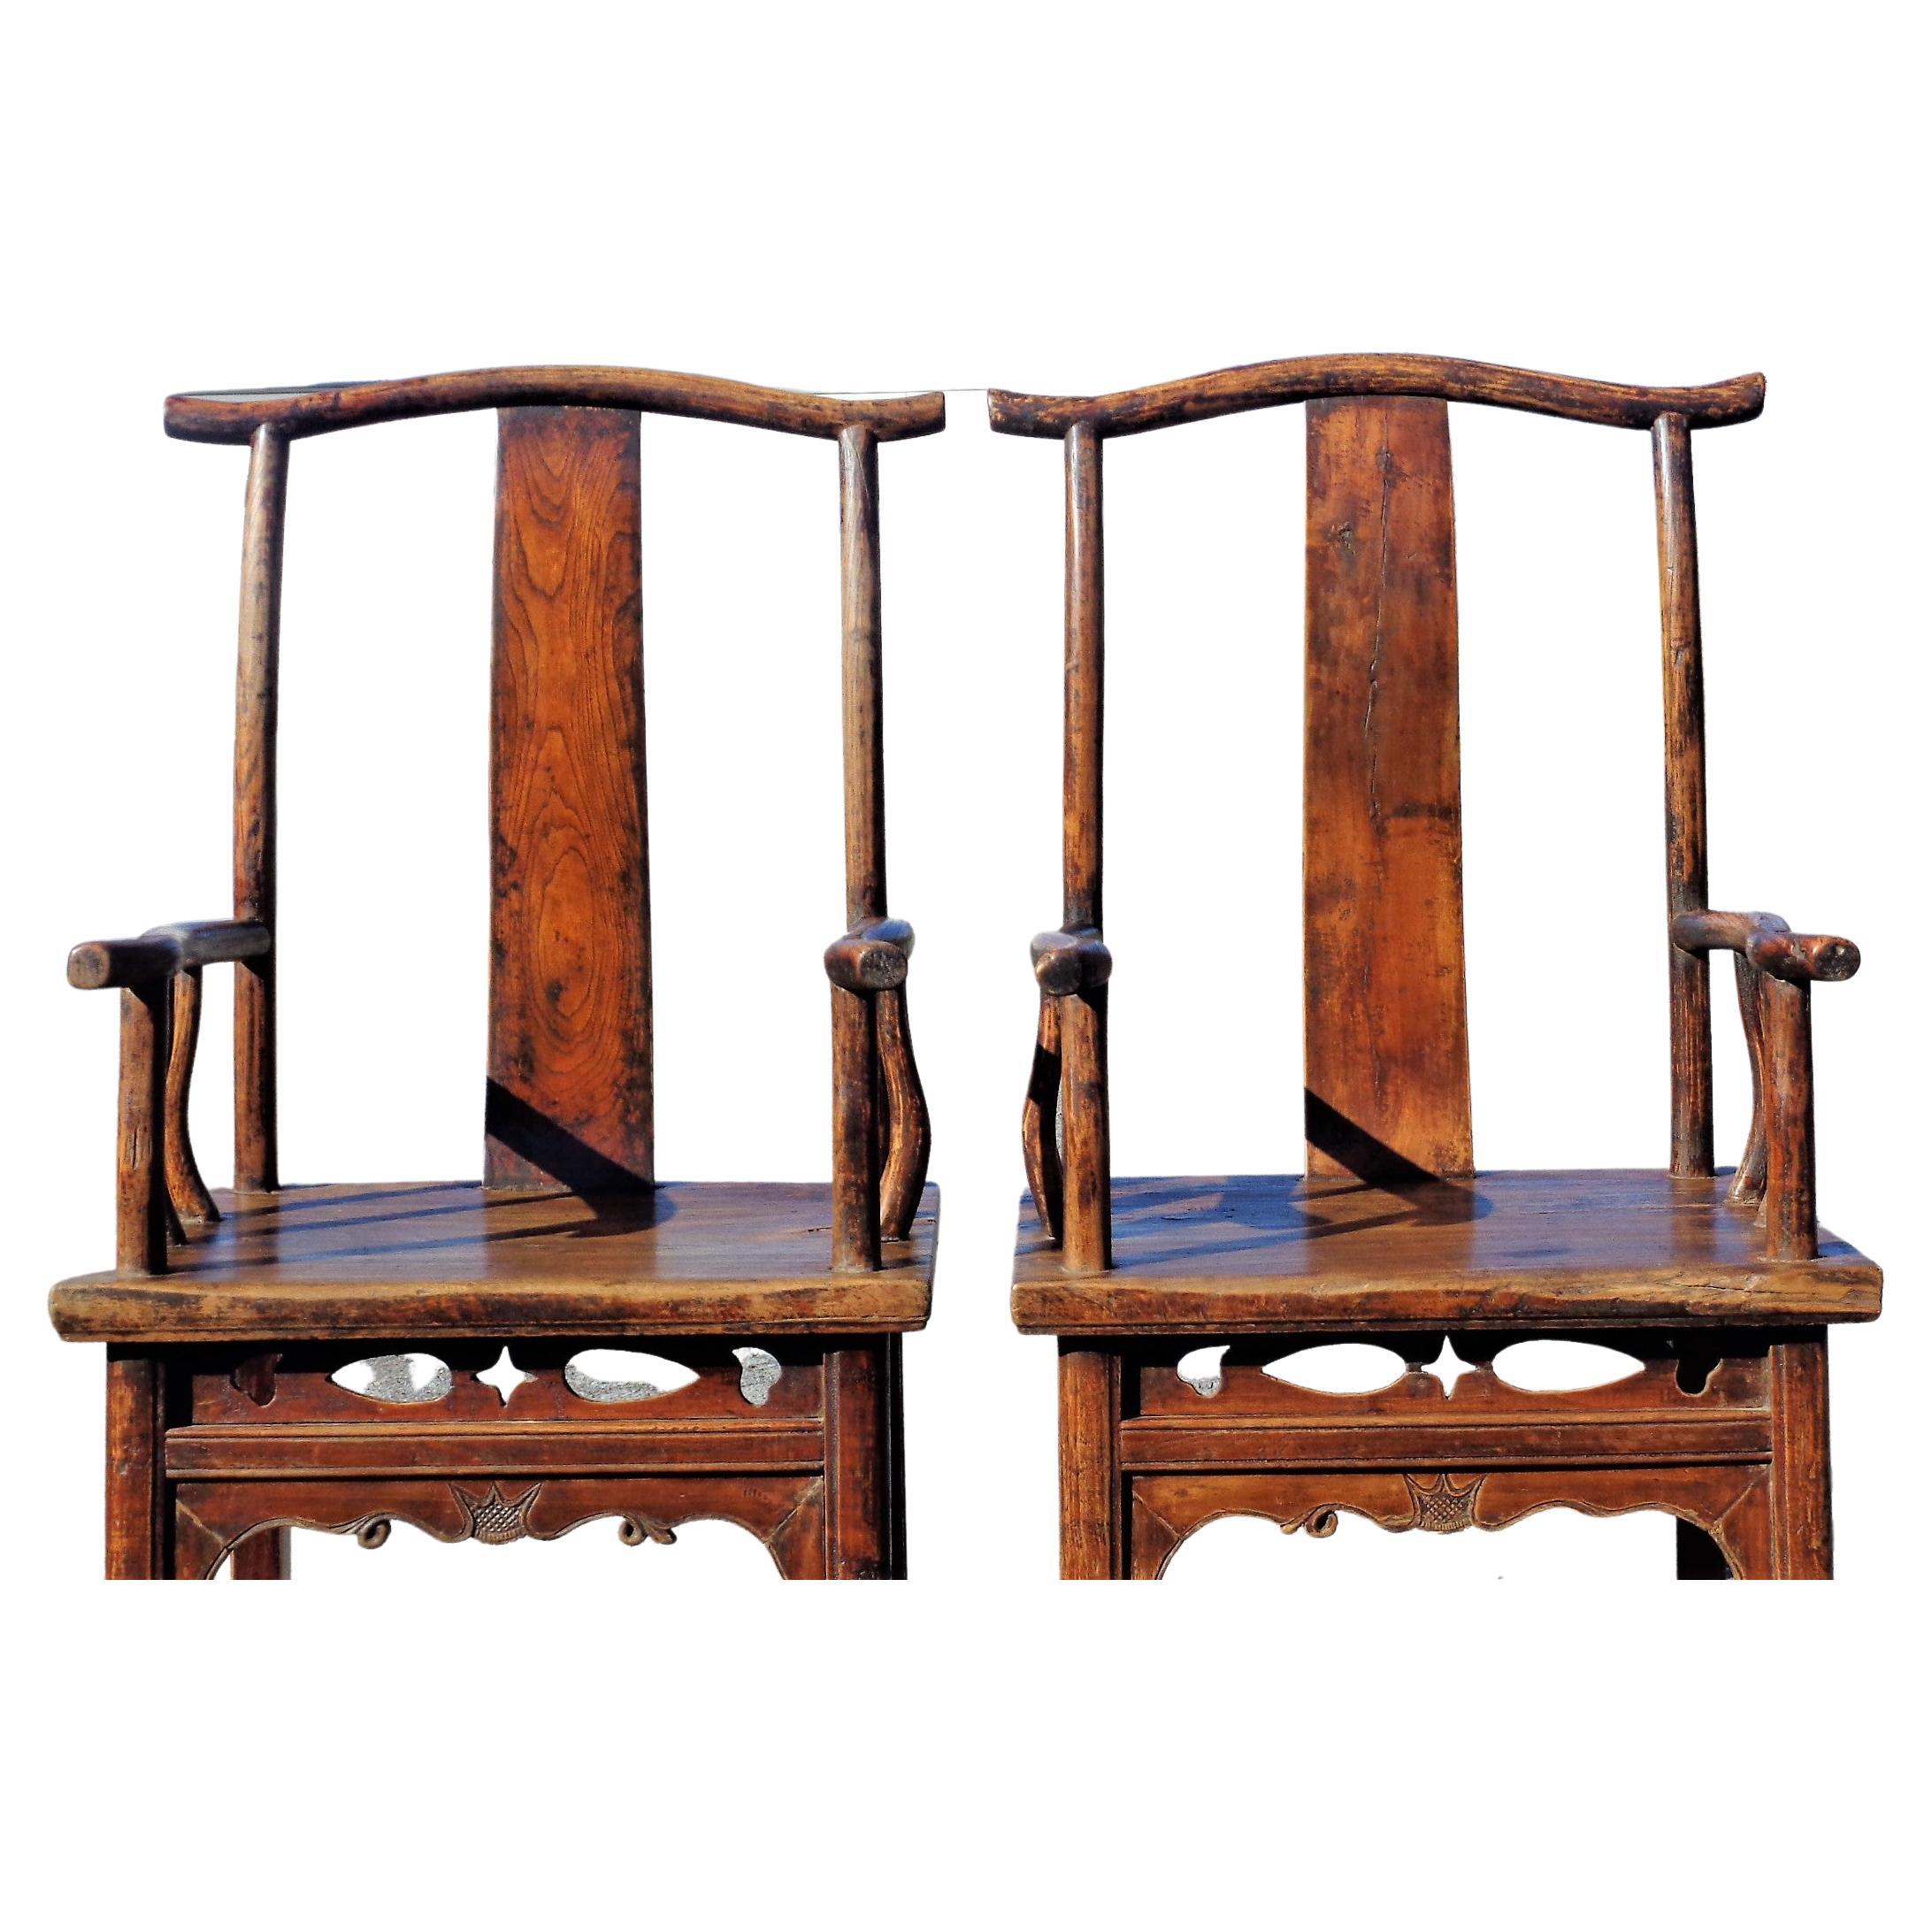 Pair of Chinese Qing dynasty hardwood elm yoke back armchairs ( officials hat chairs ) in beautifully aged original old surface color patina w/ well figured grain. Late 19th century. Look at all pictures and read condition report in comment section.